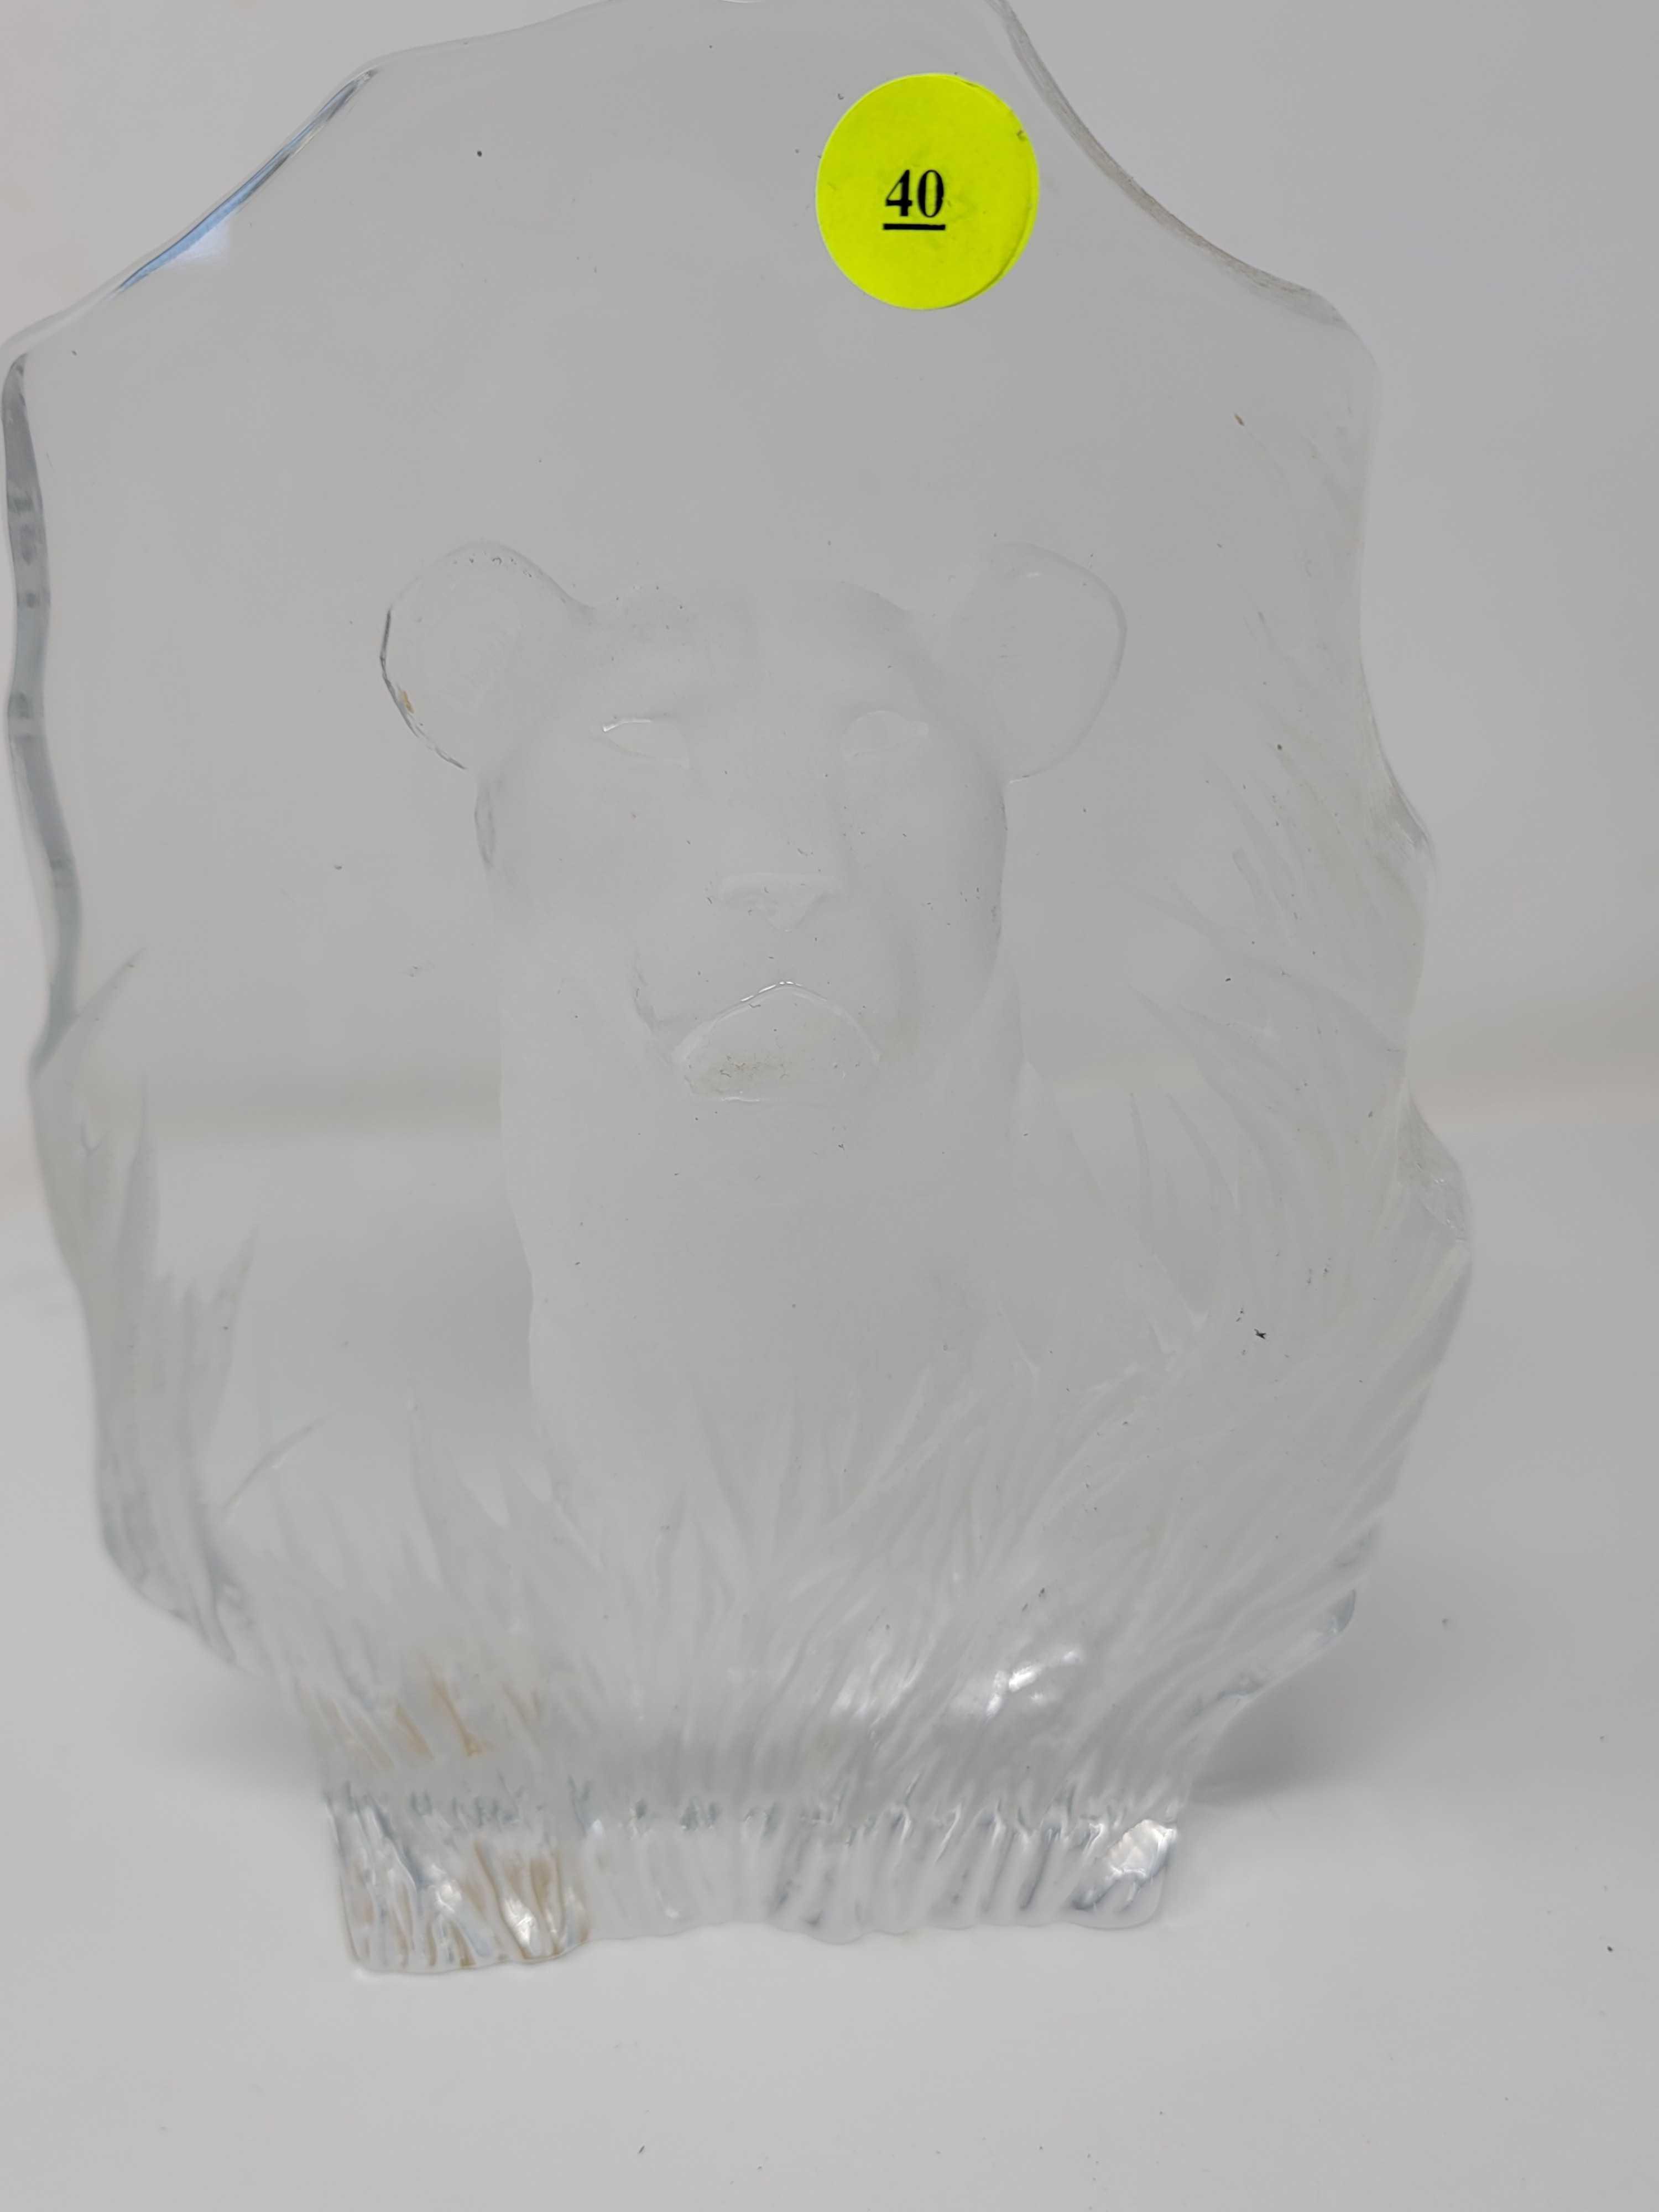 ROYAL KRONA MADE IN SWEDEN ETCHED CRYSTAL LION FIGURINE, 6 INCHES X 9 INCHES.